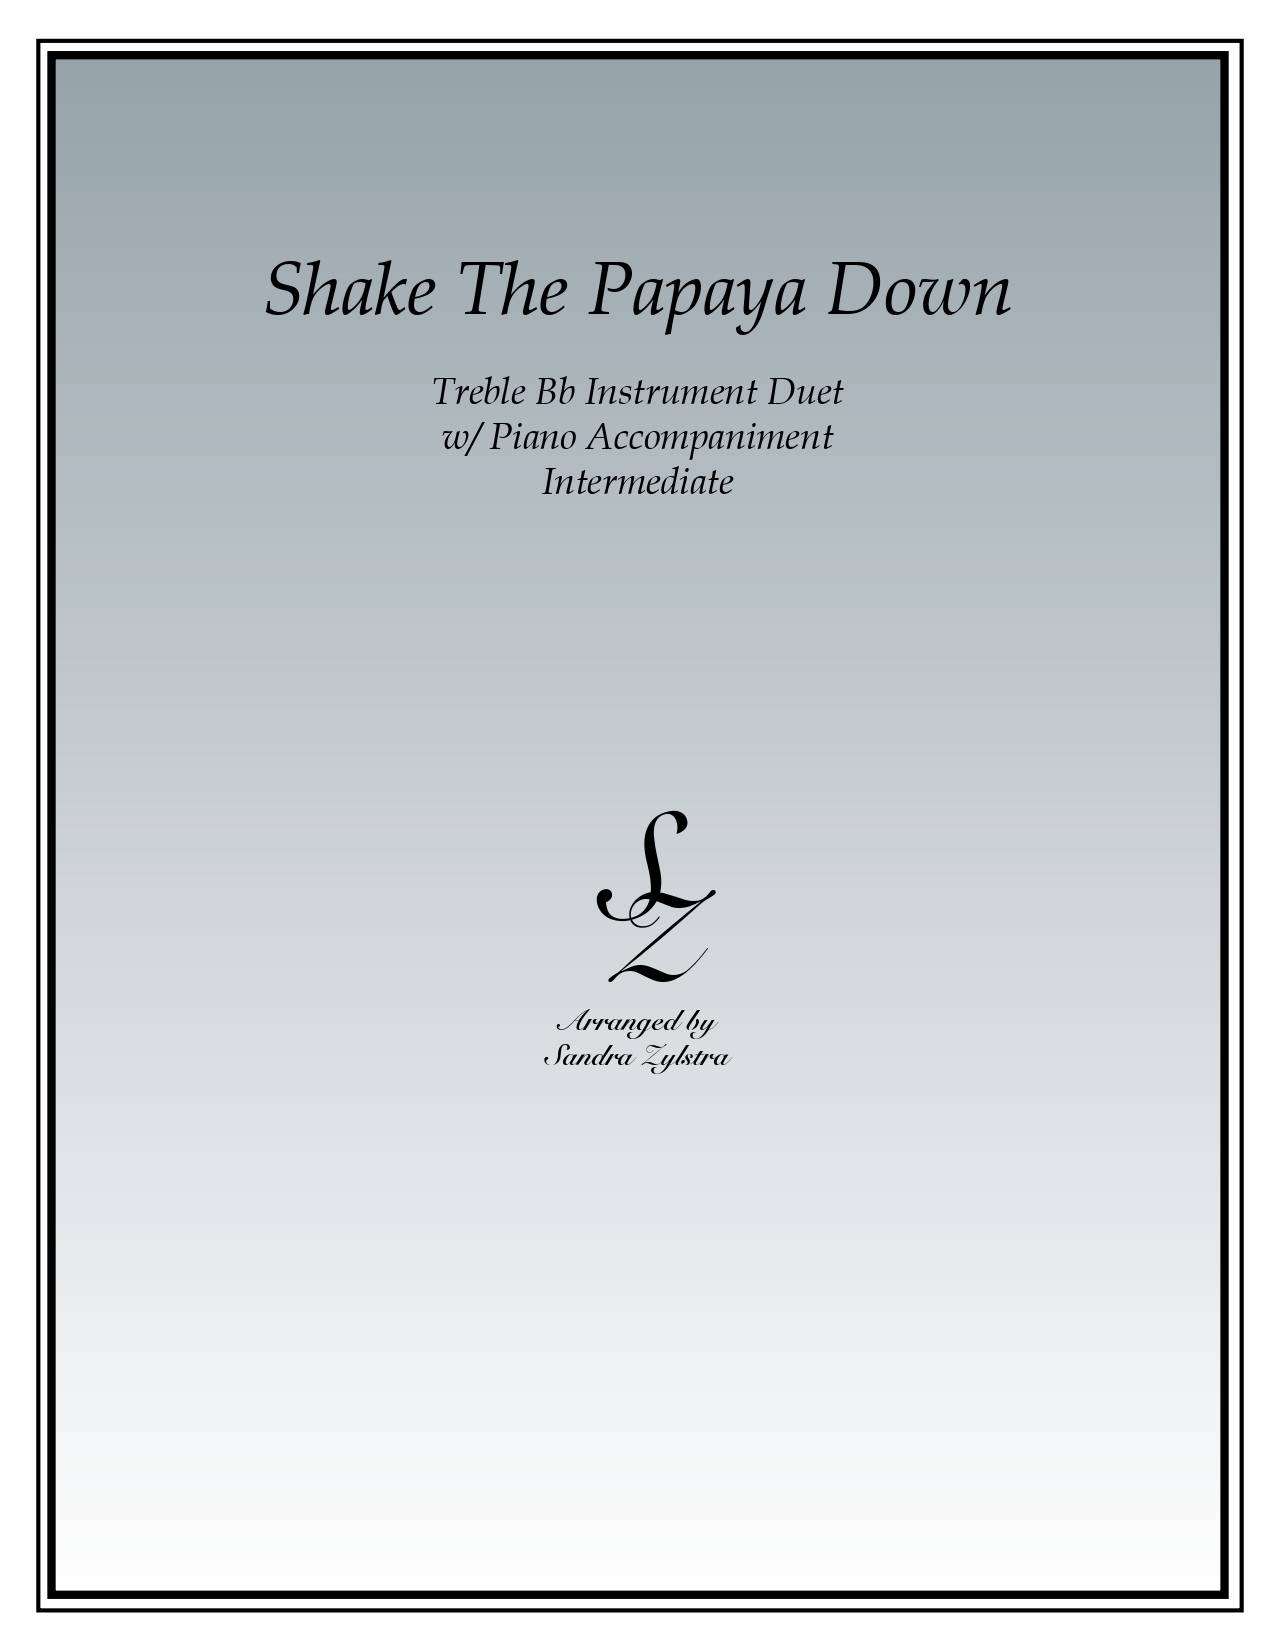 Shake The Papaya Down Bb instrument duet part cover page 00011